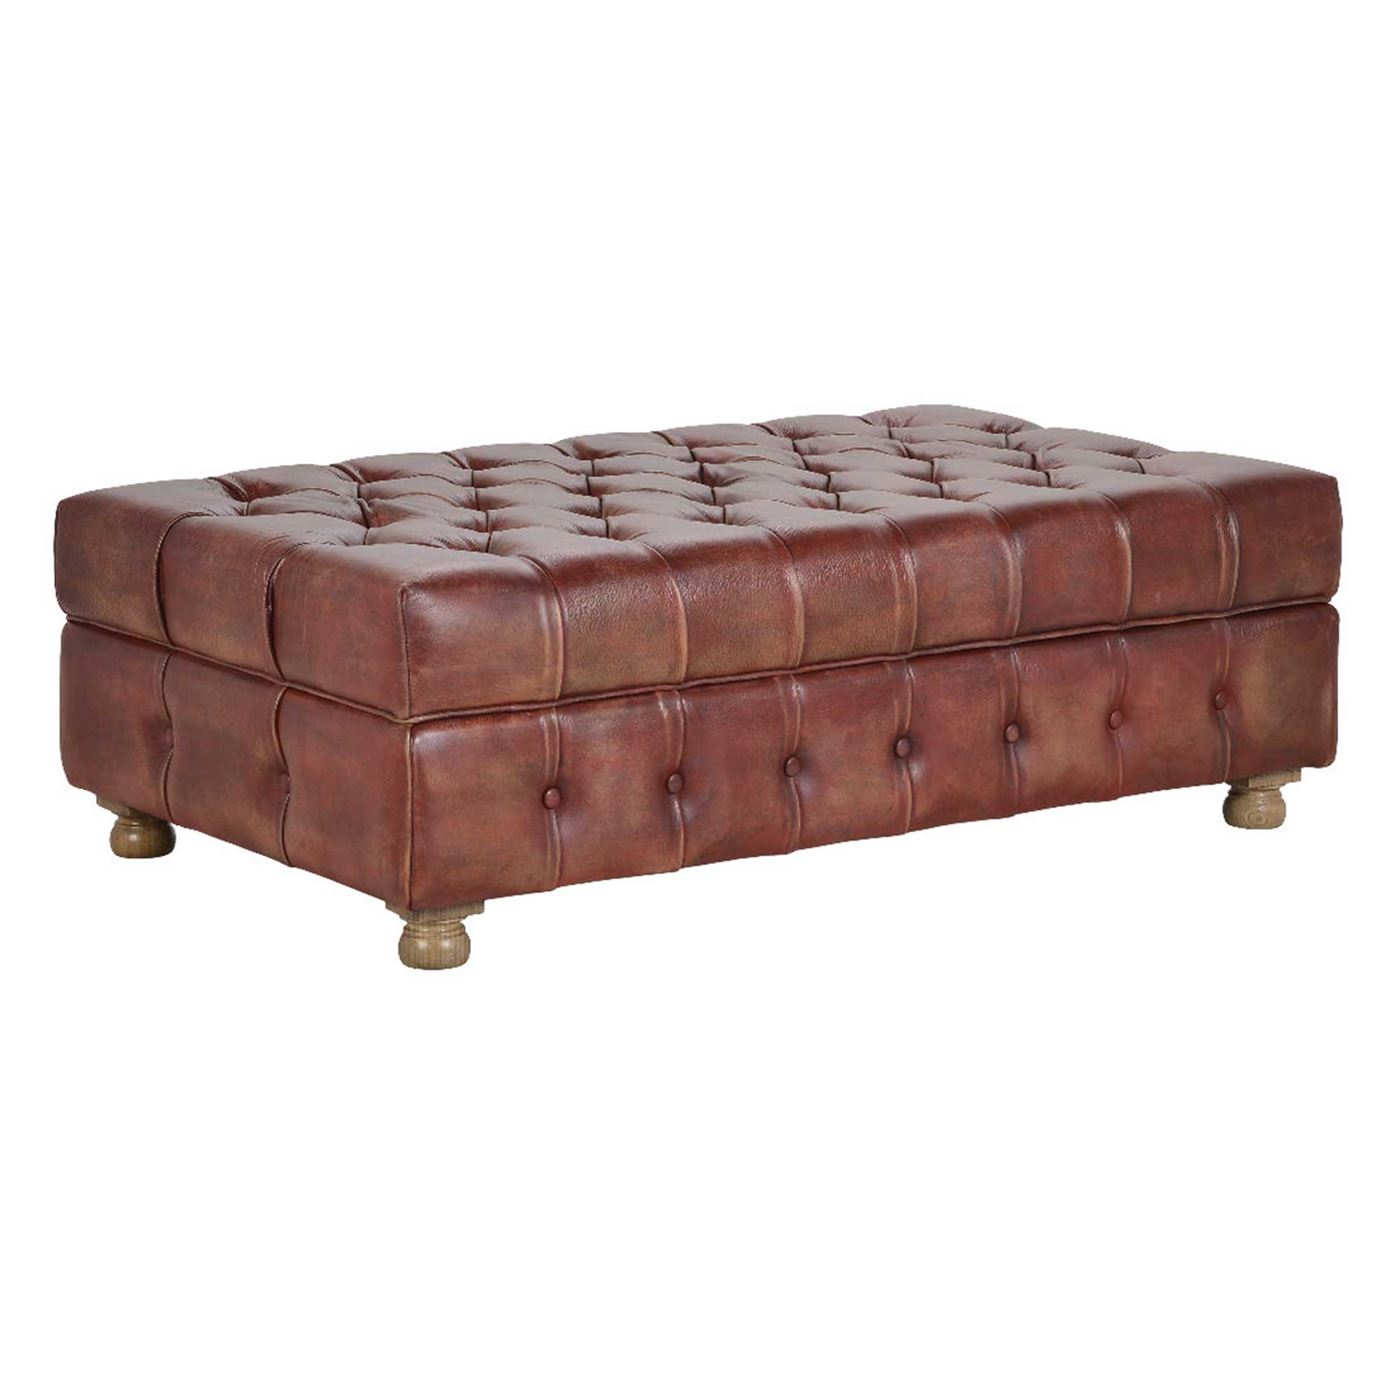 Timothy Oulton Westminster Button Medium Store Footstool, Red Leather | Barker & Stonehouse